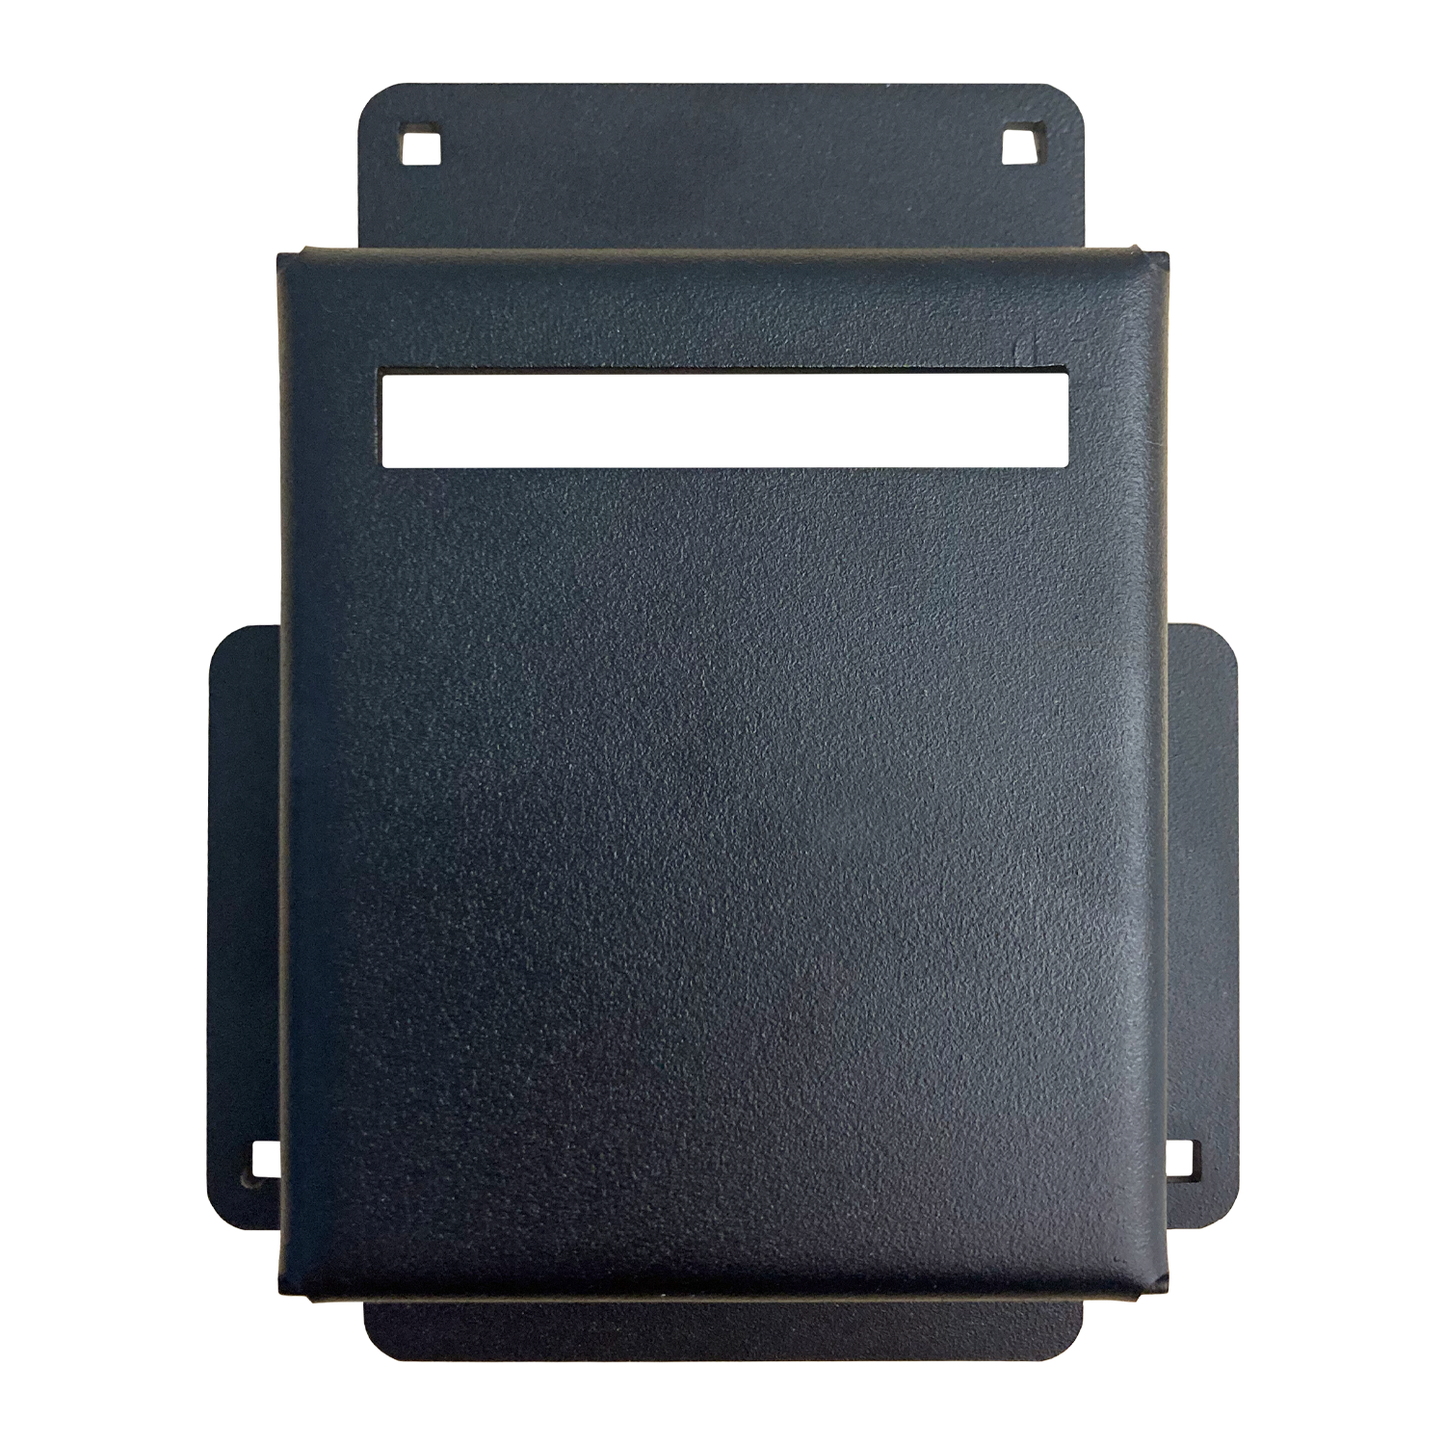 Sold by Miele Manufacturing. Add an extra layer of security to your Pennsylvania Skill machines with a Bill Acceptor Housing Plate. The Bill Acceptor Housing Plates are available for ICTs, JCMs, MEIs, and Spectra Bill Acceptors.